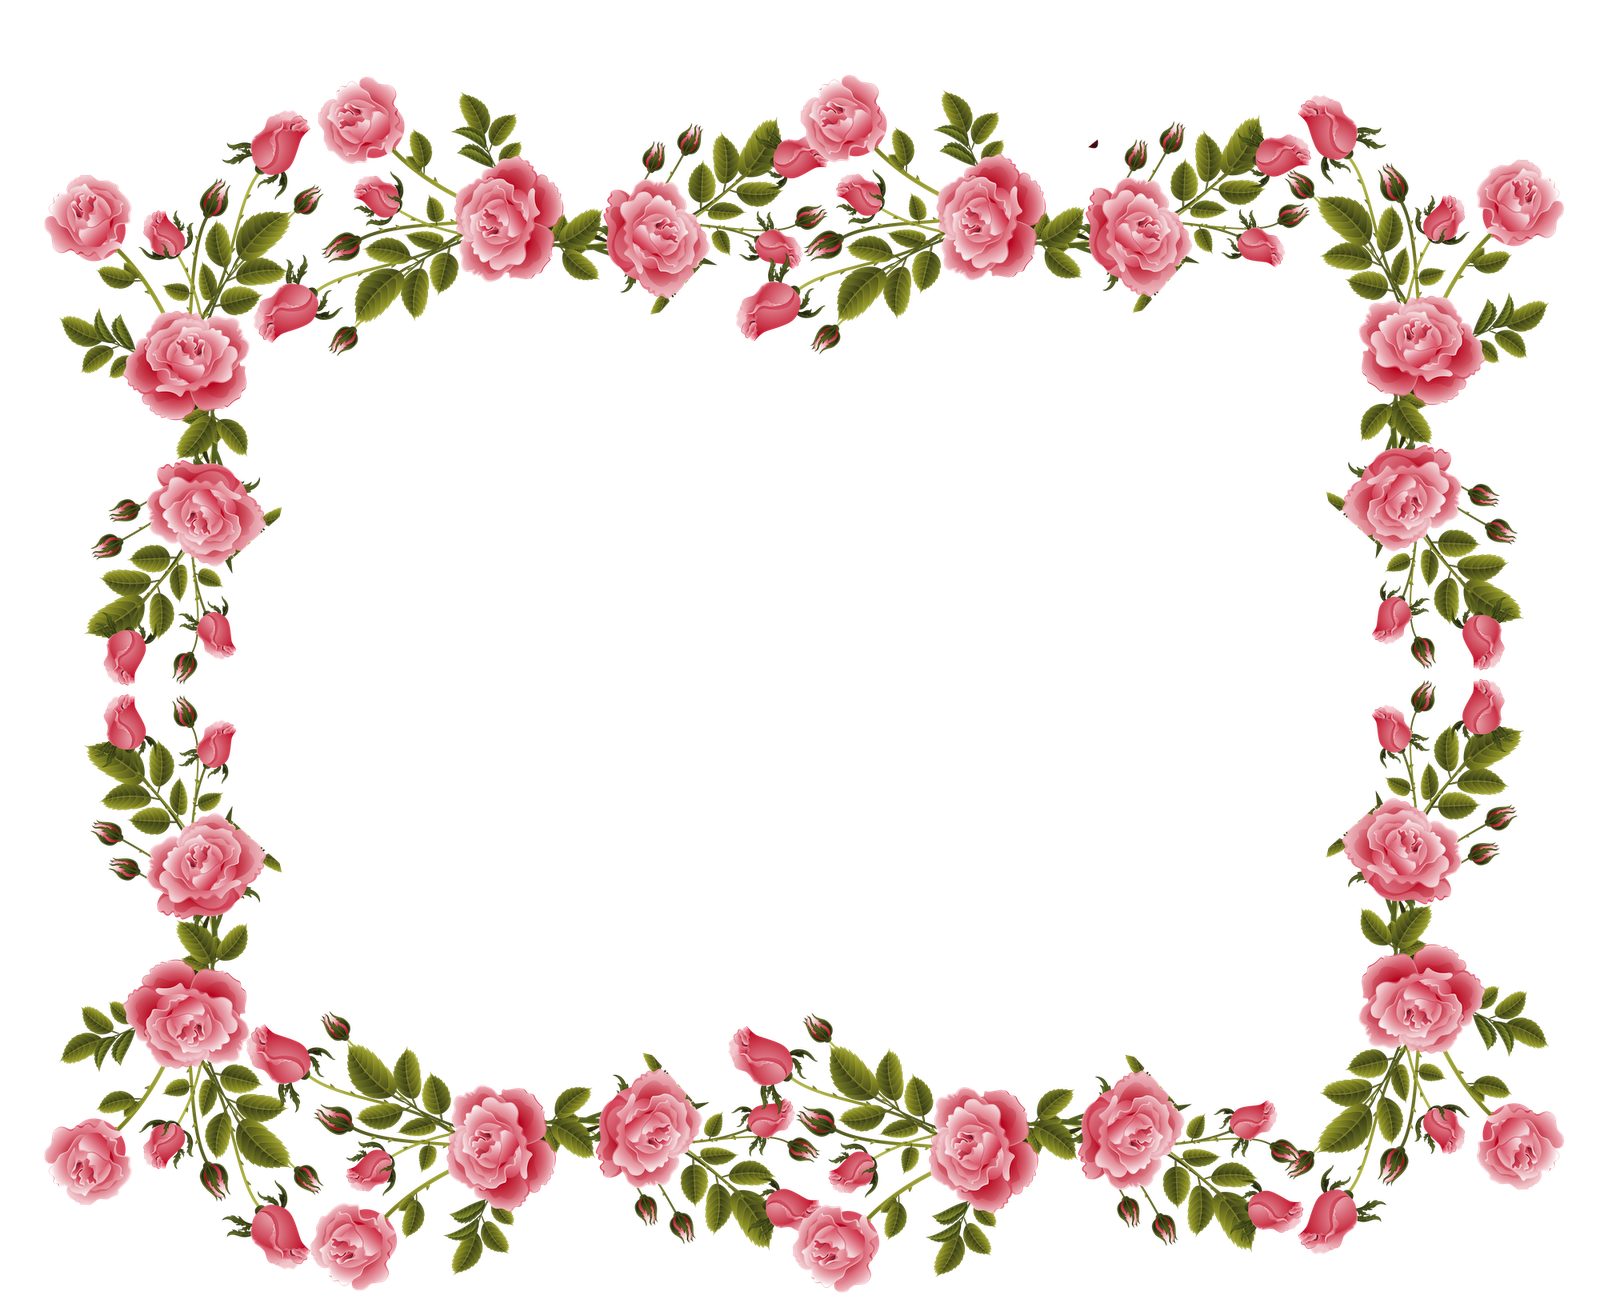 Clipart Flower Border Clipart Panda Rose pink rose border png border clipart  png free clip art images freeclipartpw pink roses decoration this image as  ClipartLook.com 